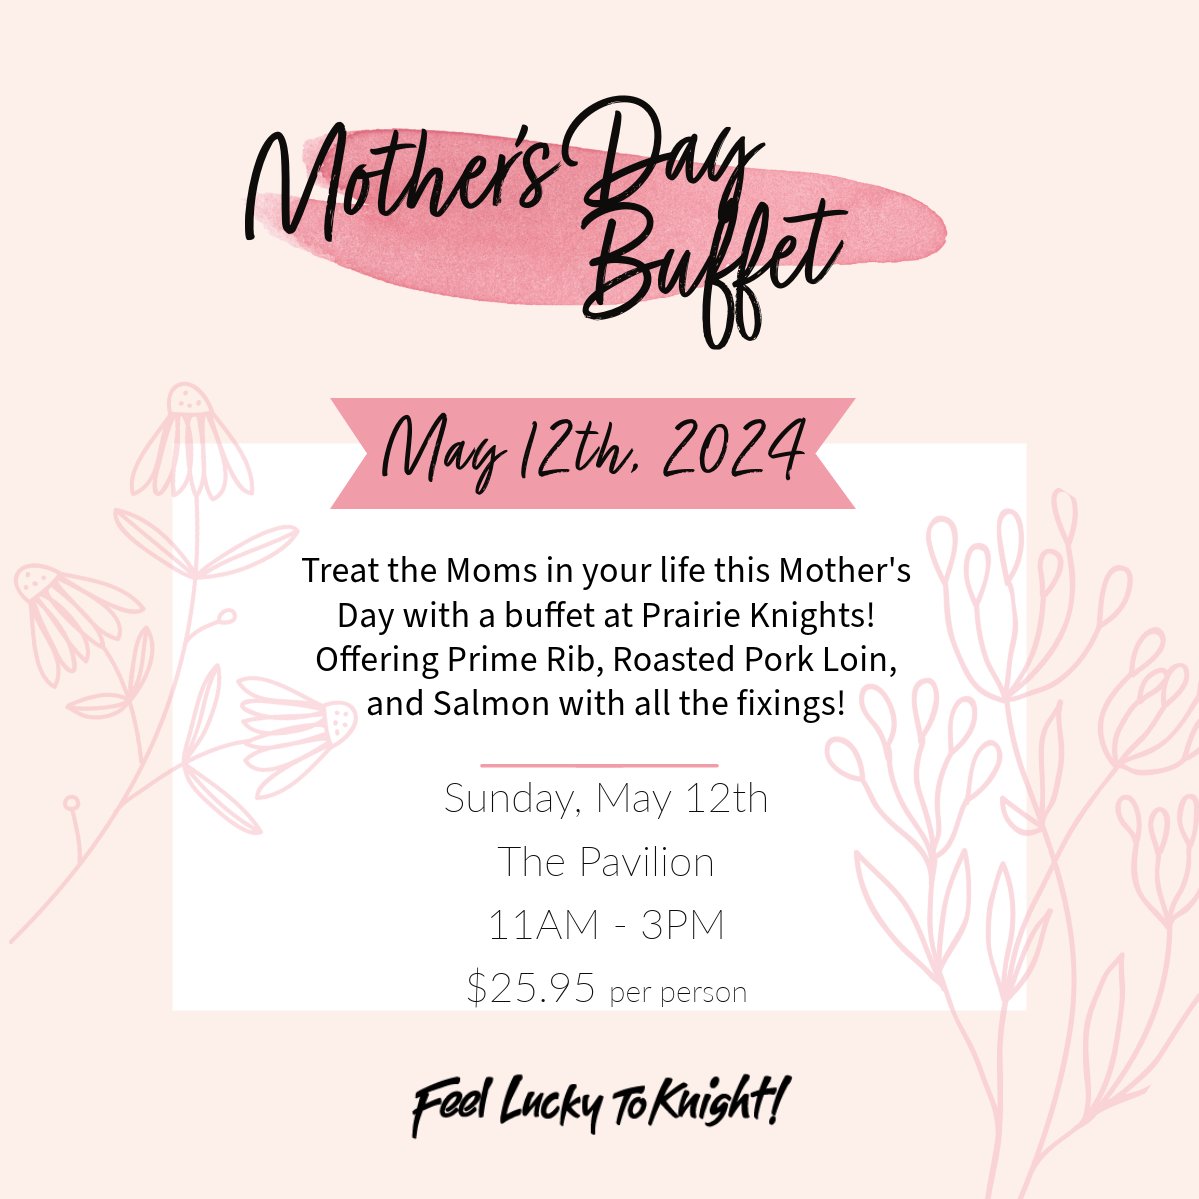 🌸✨ Celebrate Mom's Special Day at The Pavilion! ✨🌸 Treat a mom in your life to a delectable feast this Mother's Day! Join us on May 12th from 11am to 3pm for a sumptuous Mother's Day Buffet, where we'll be serving up mouthwatering dishes fit for a queen!